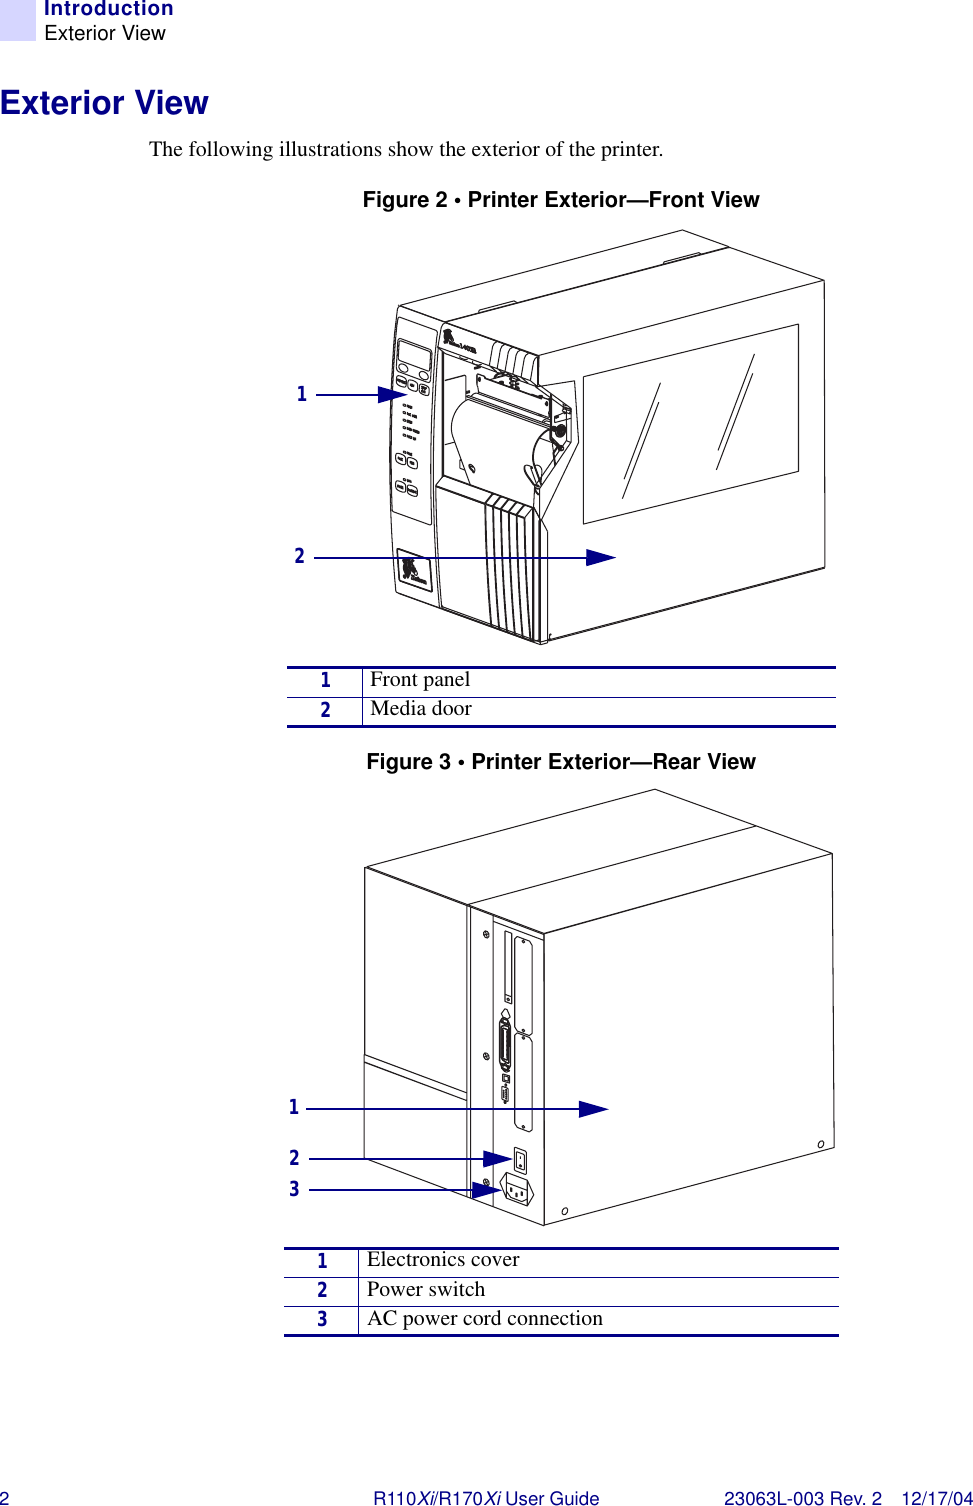 2R110Xi/R170Xi User Guide 23063L-003 Rev. 2 12/17/04IntroductionExterior ViewExterior ViewThe following illustrations show the exterior of the printer.Figure 2 • Printer Exterior—Front ViewFigure 3 • Printer Exterior—Rear View1Front panel2Media door1Electronics cover2Power switch3AC power cord connection12213